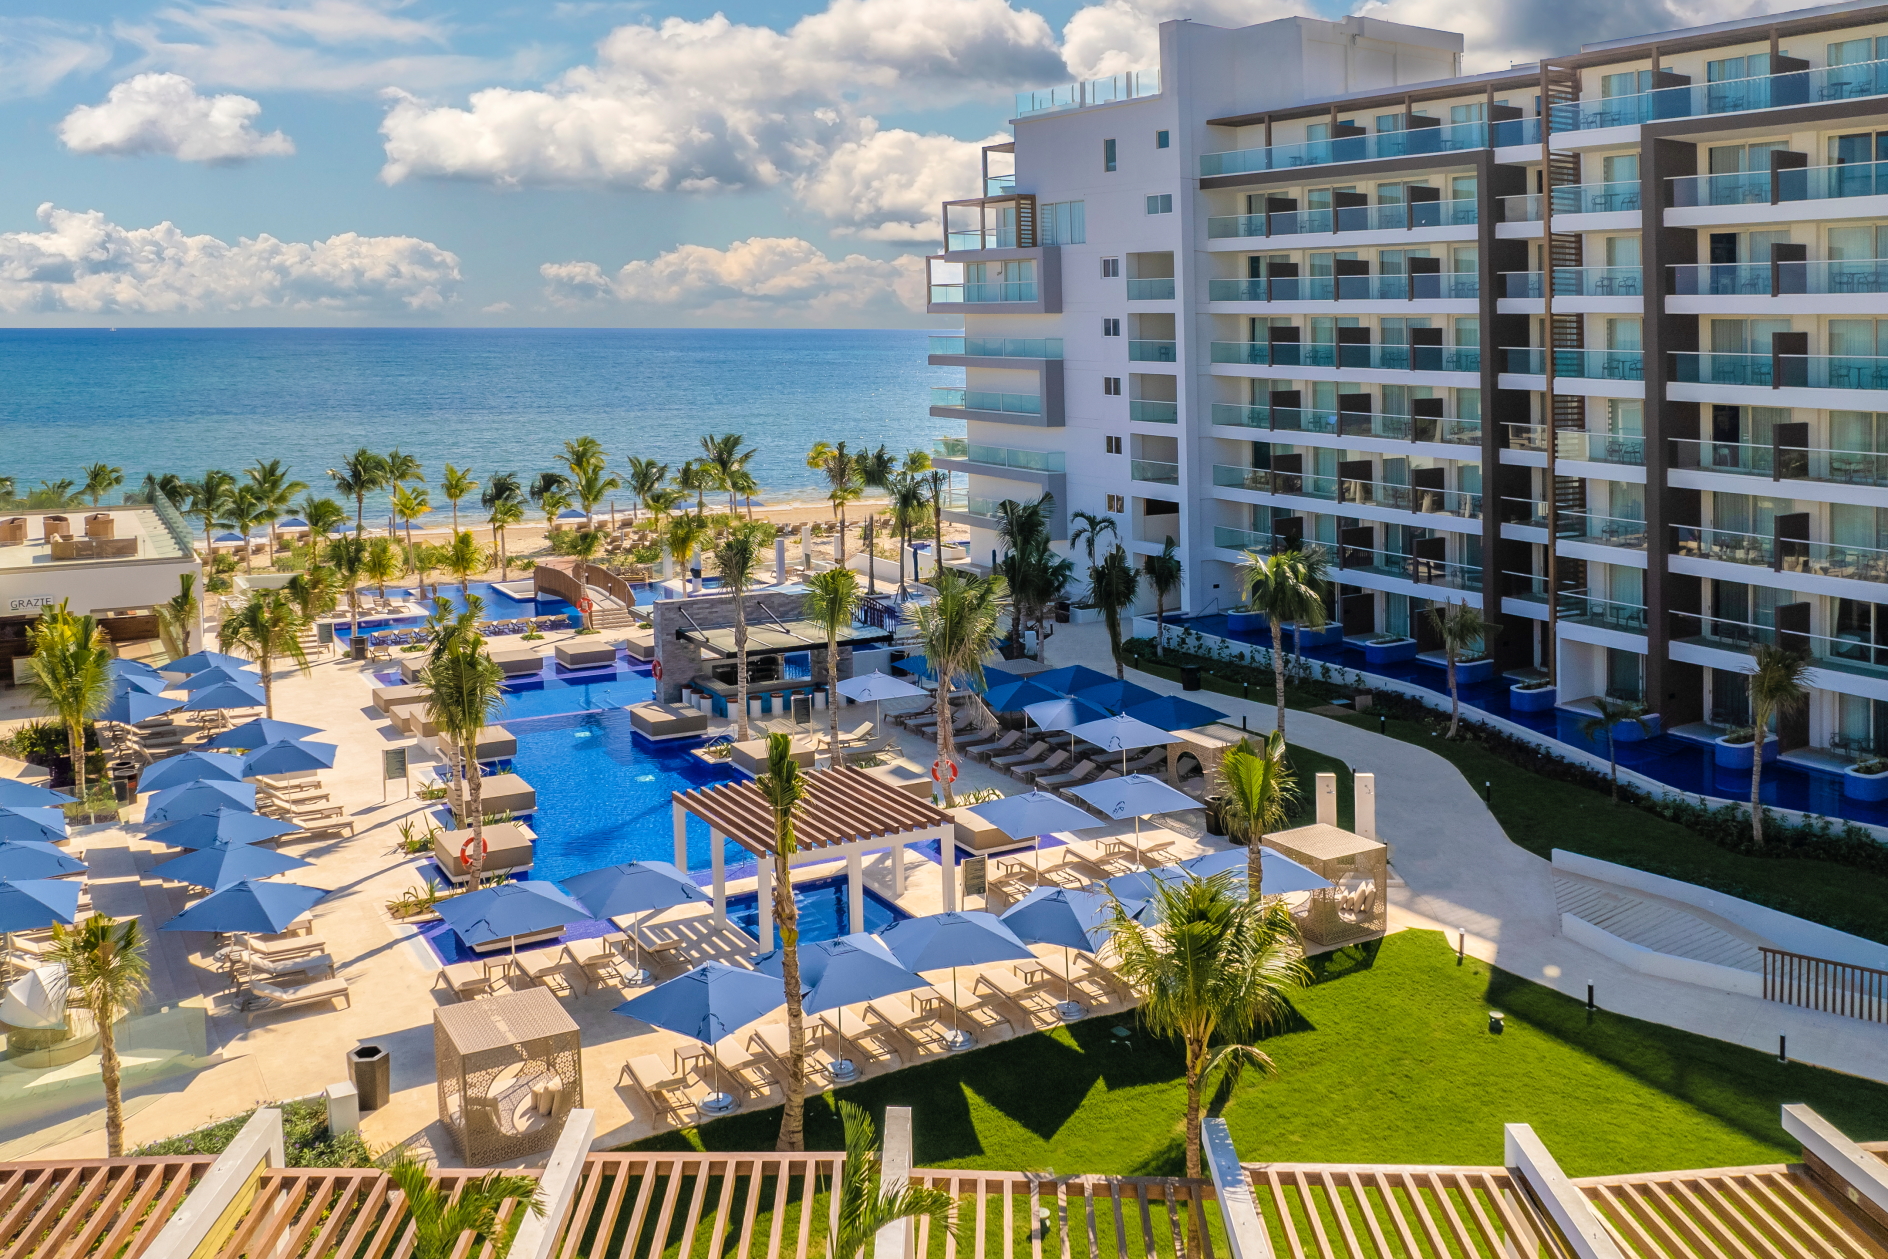 The all-inclusive Royalton Splash Riviera Cancun is expected to open in late 2022. Click to enlarge.